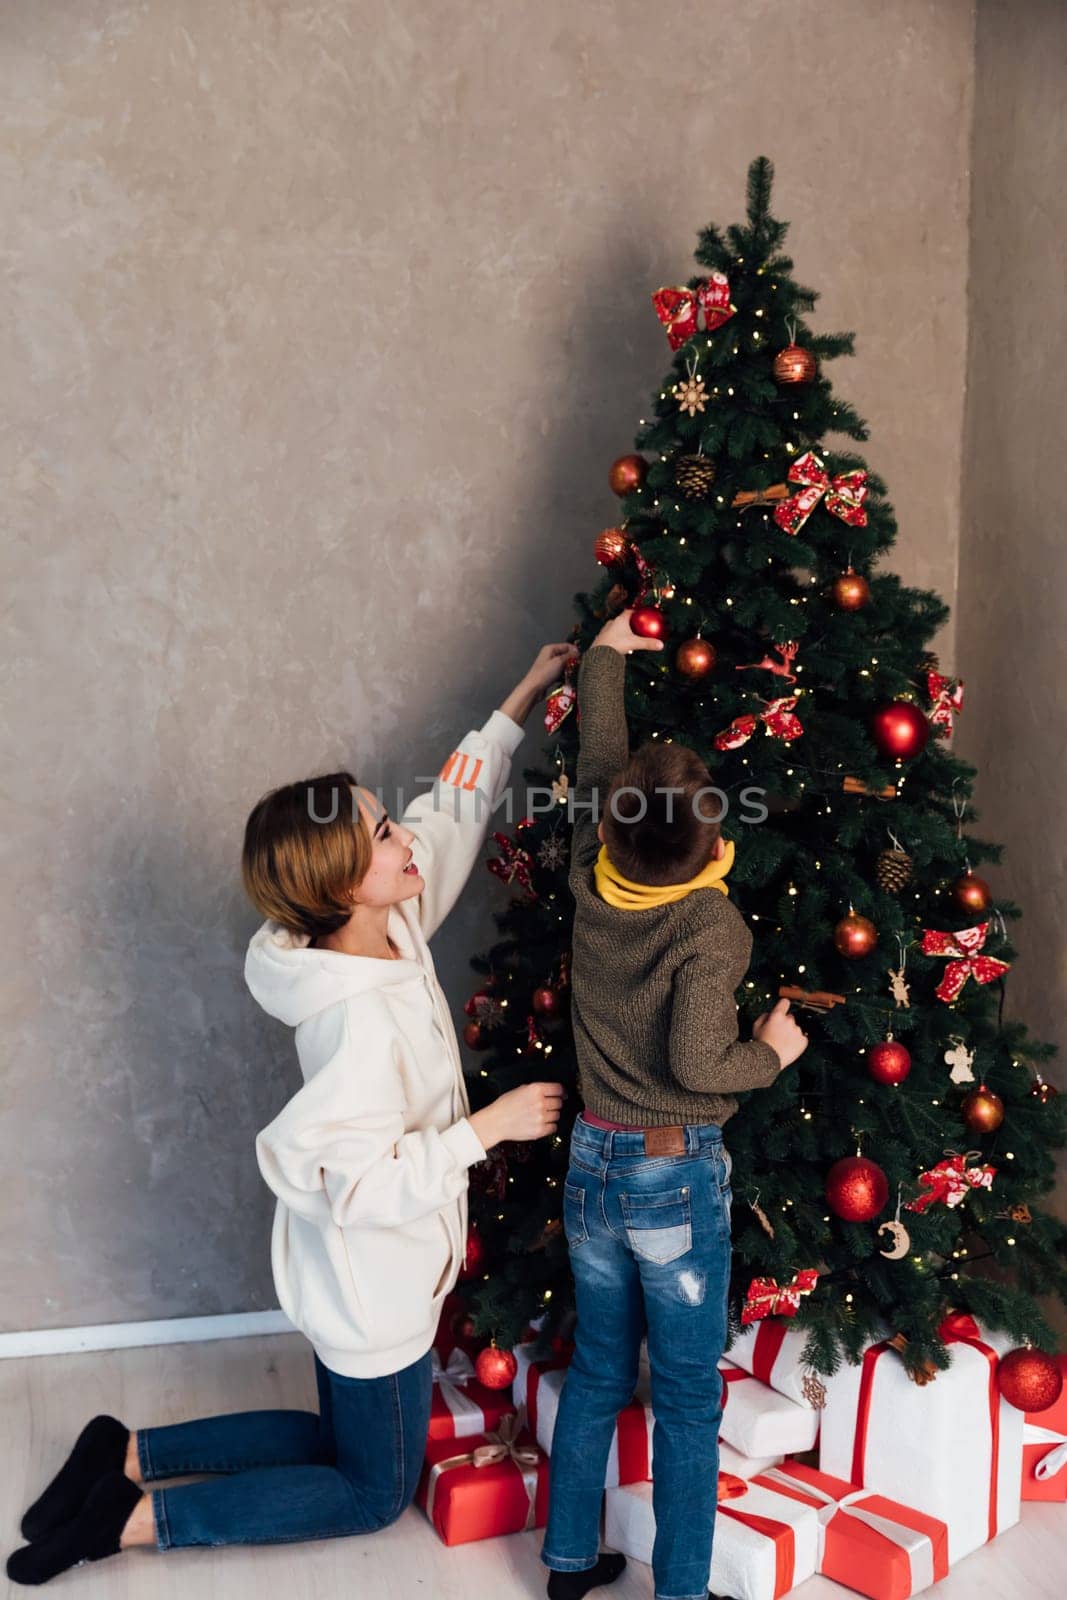 mother and son decorate the Christmas tree for the holiday New Year Christmas by Simakov